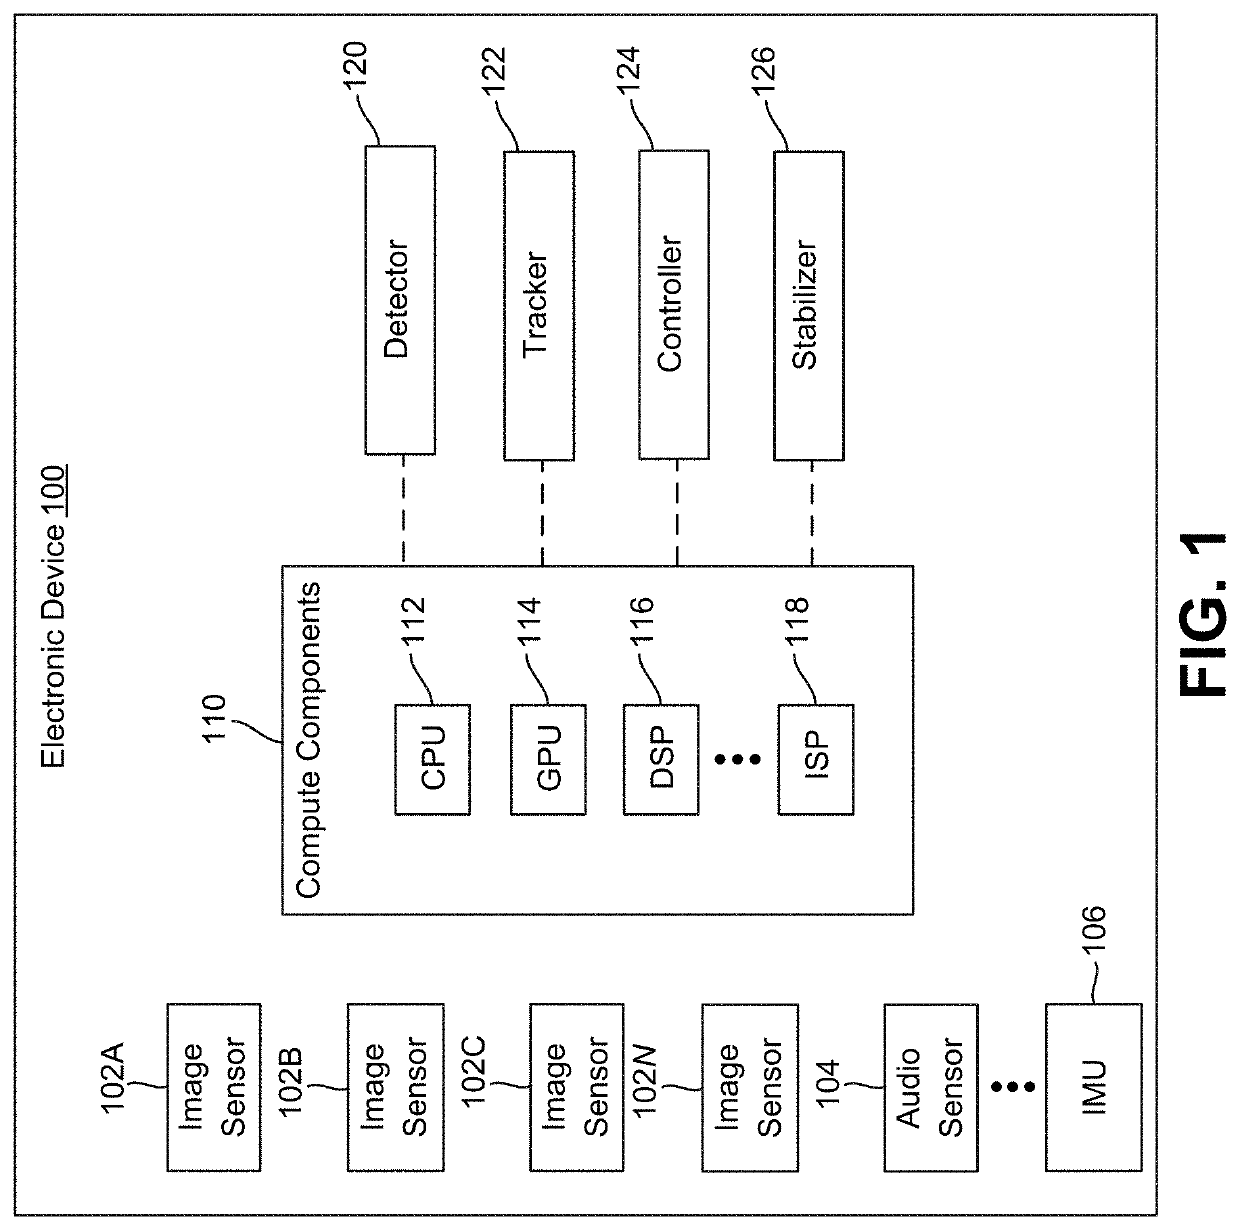 Region of interest capture for electronic devices